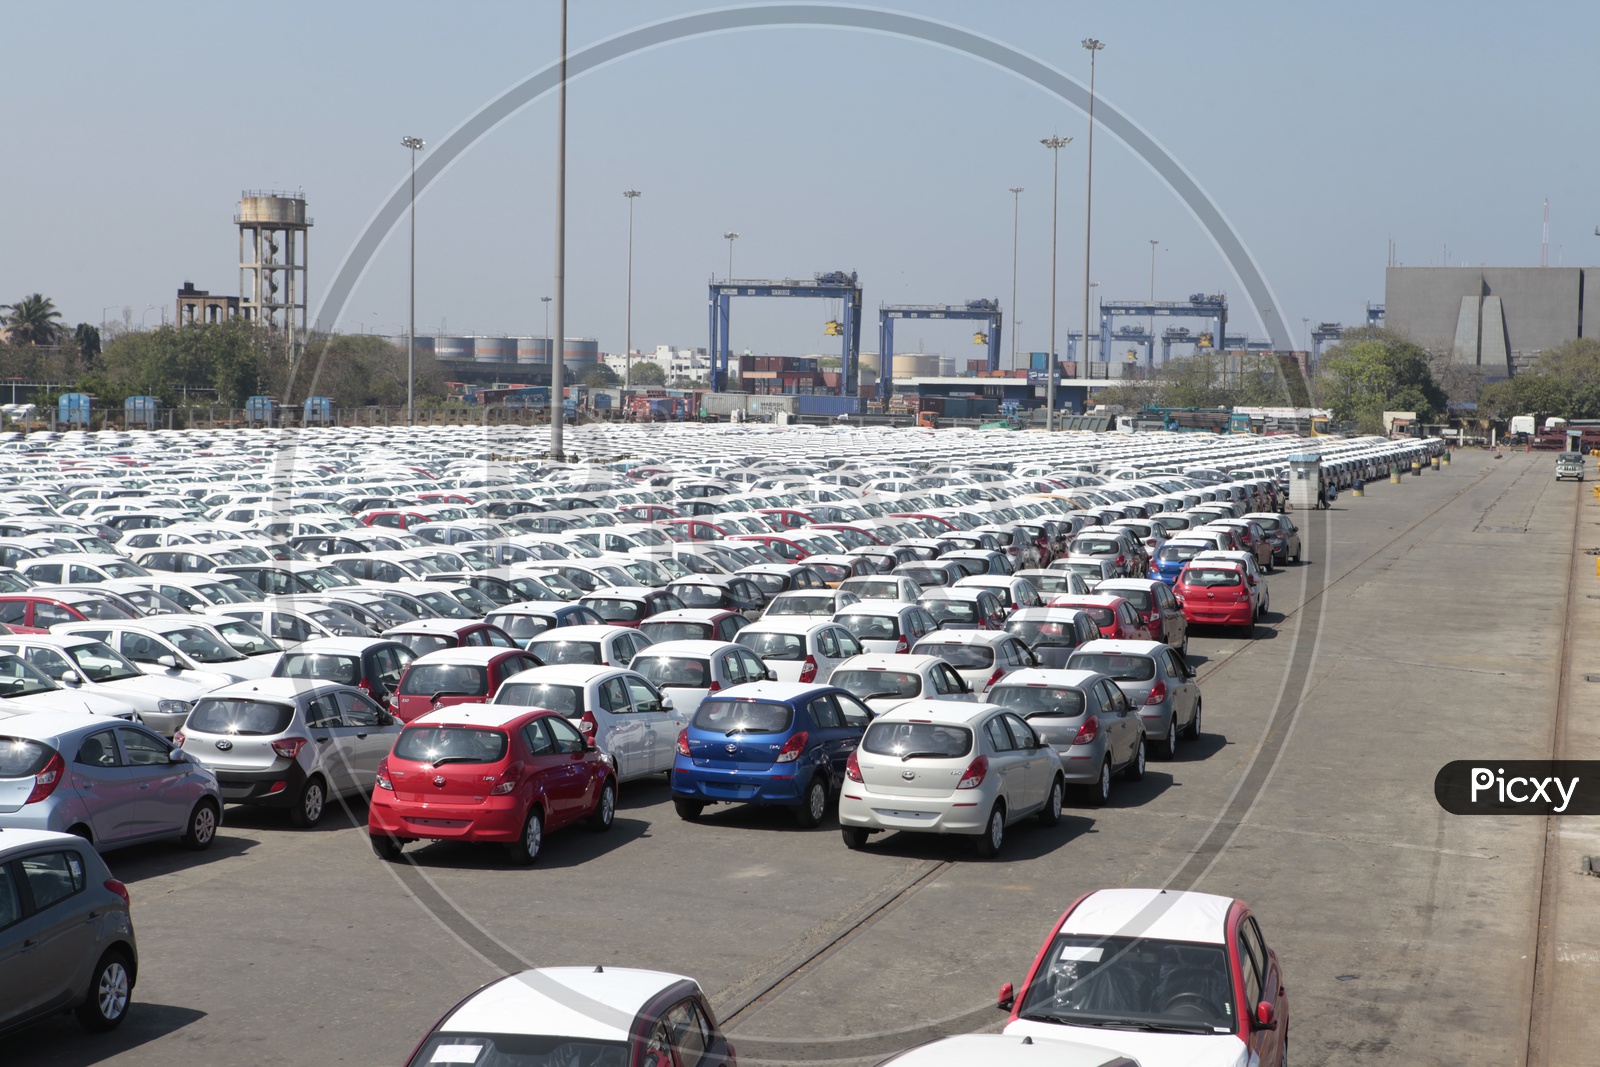 Hyundai brand new cars imported by the port area